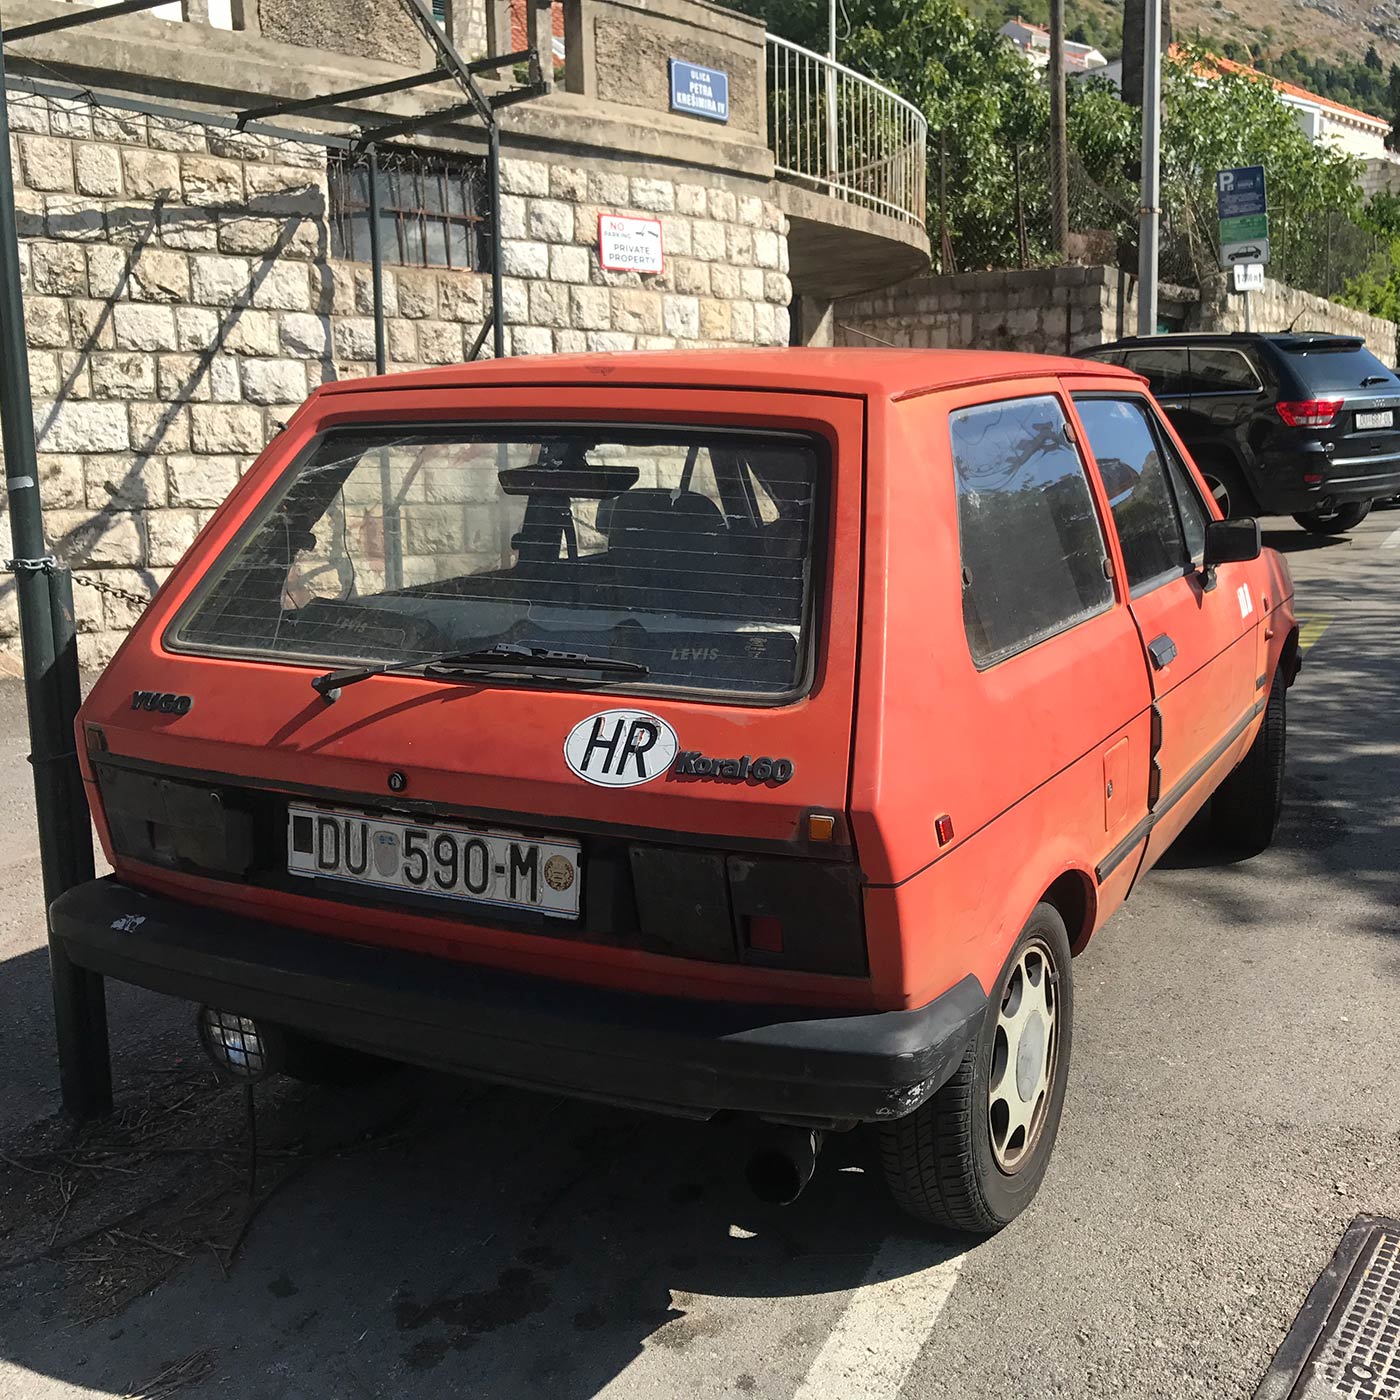 Making Love in the Back of a Yugo